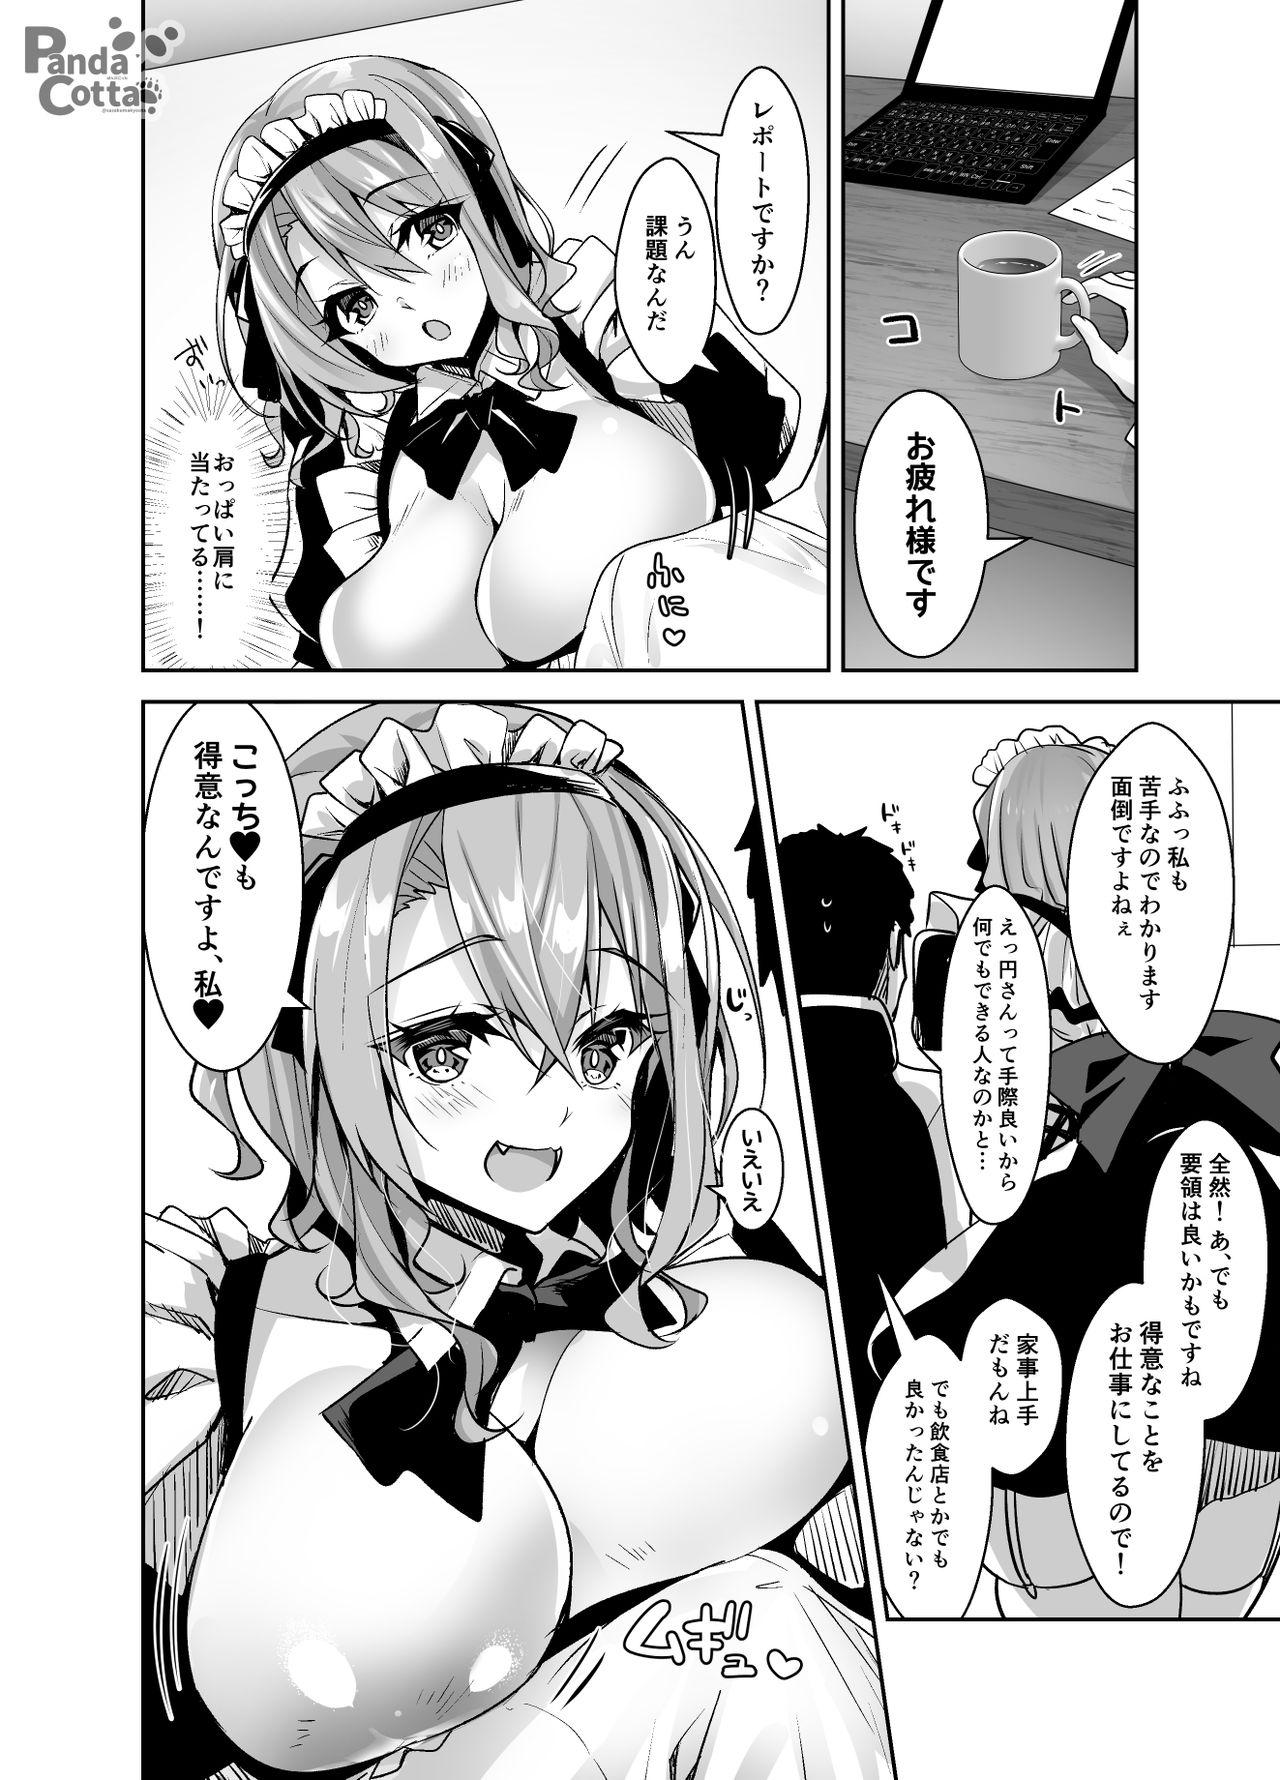 Oppai Maid Delivery 7